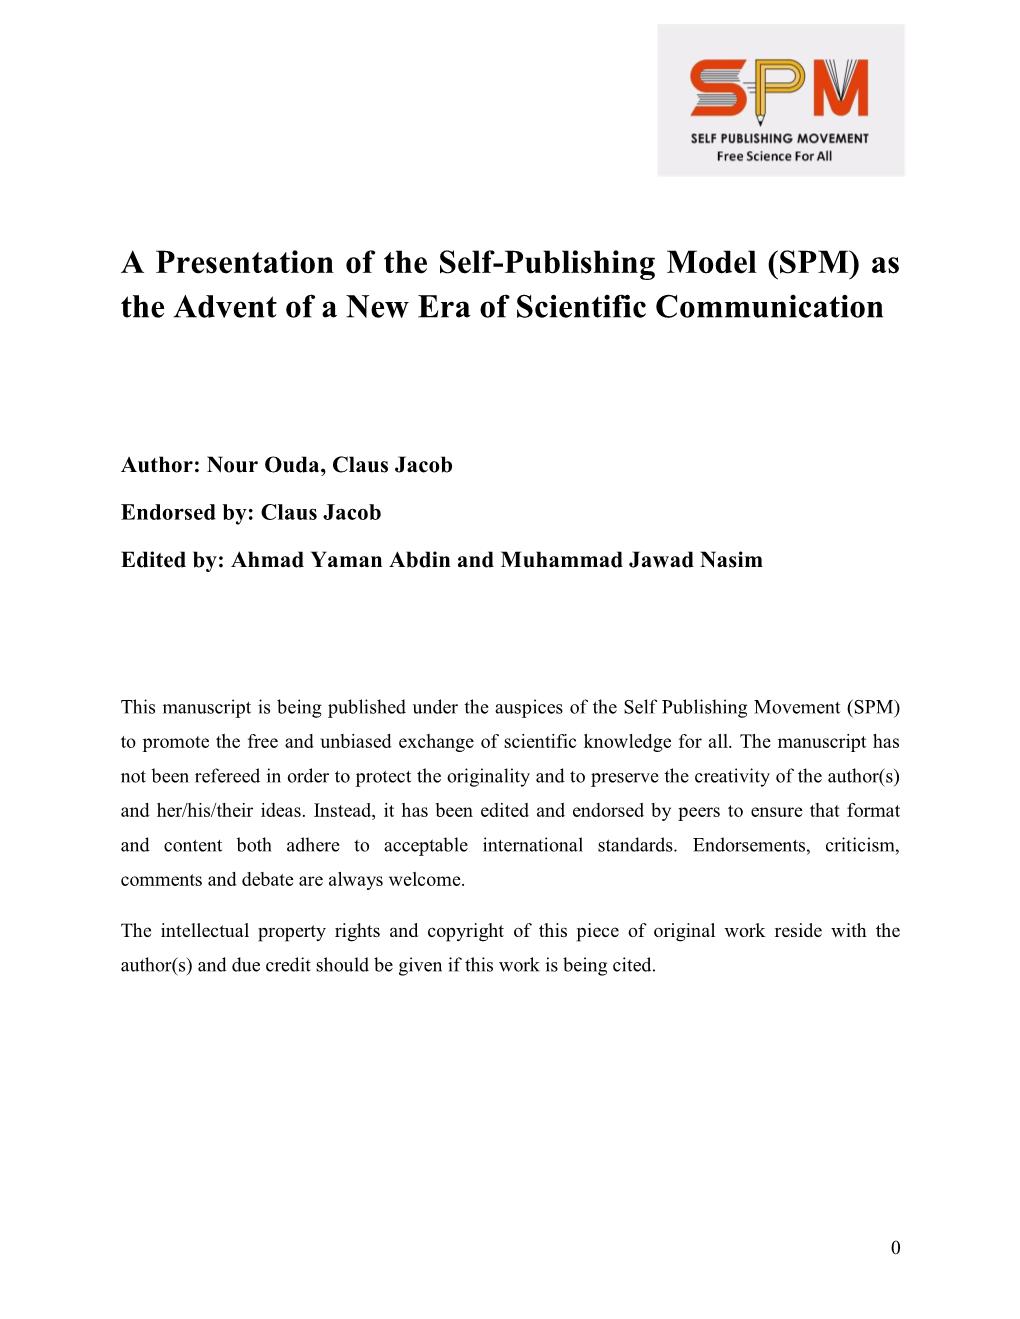 A Presentation of the Self-Publishing Model (SPM) As the Advent of a New Era of Scientific Communication